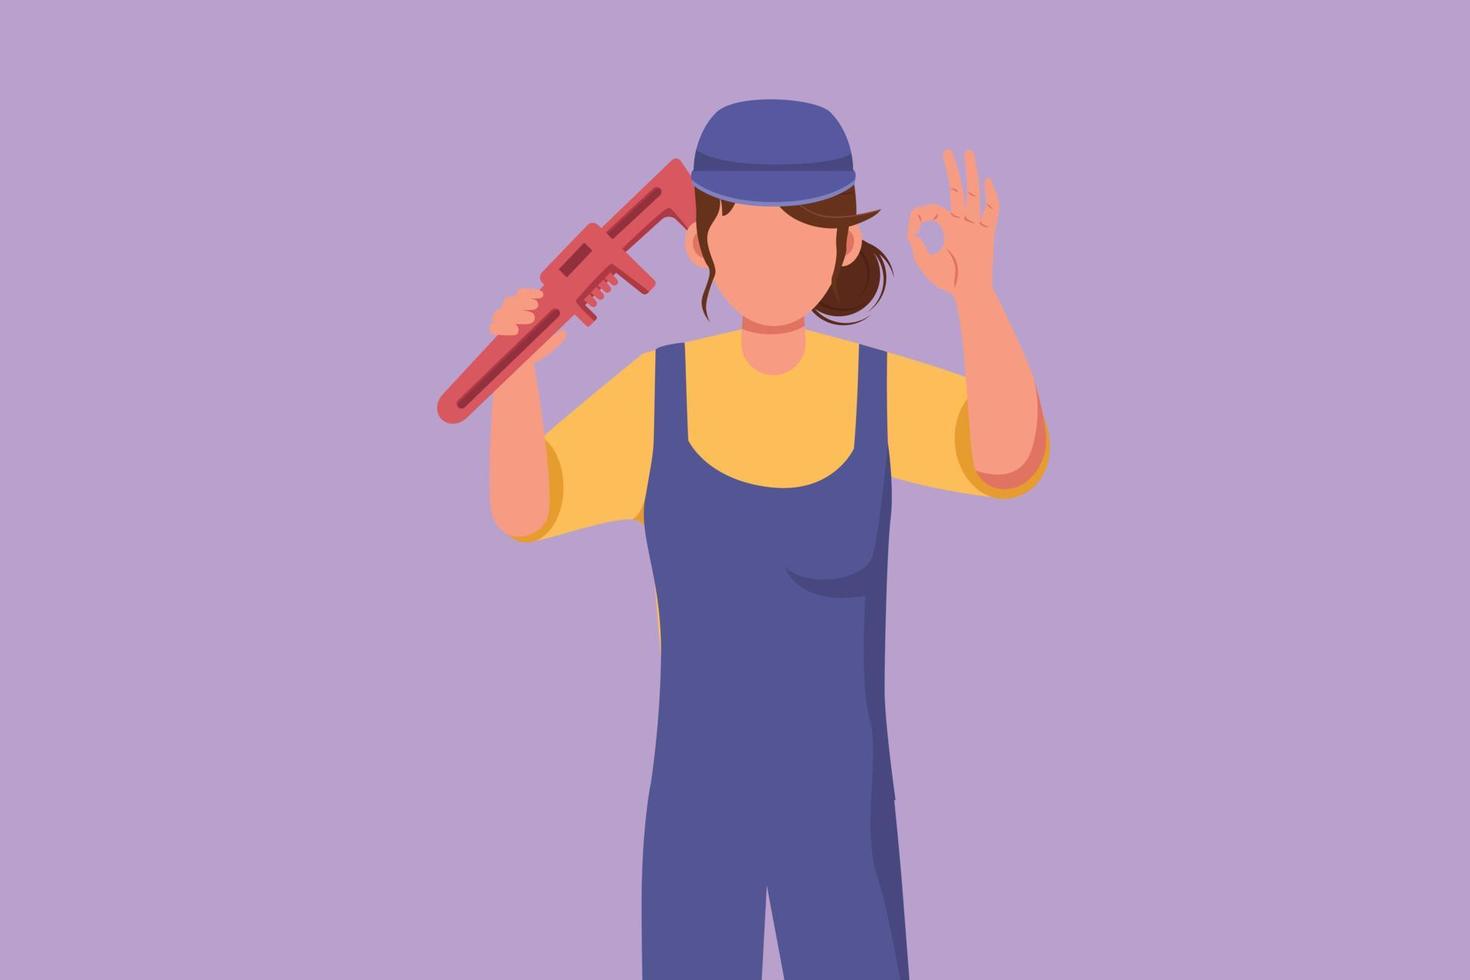 Character flat drawing beautiful female plumber holding wrench and wear helmet with okay gesture, ready to work on repairing leaking drain in sink and houses drains. Cartoon design vector illustration